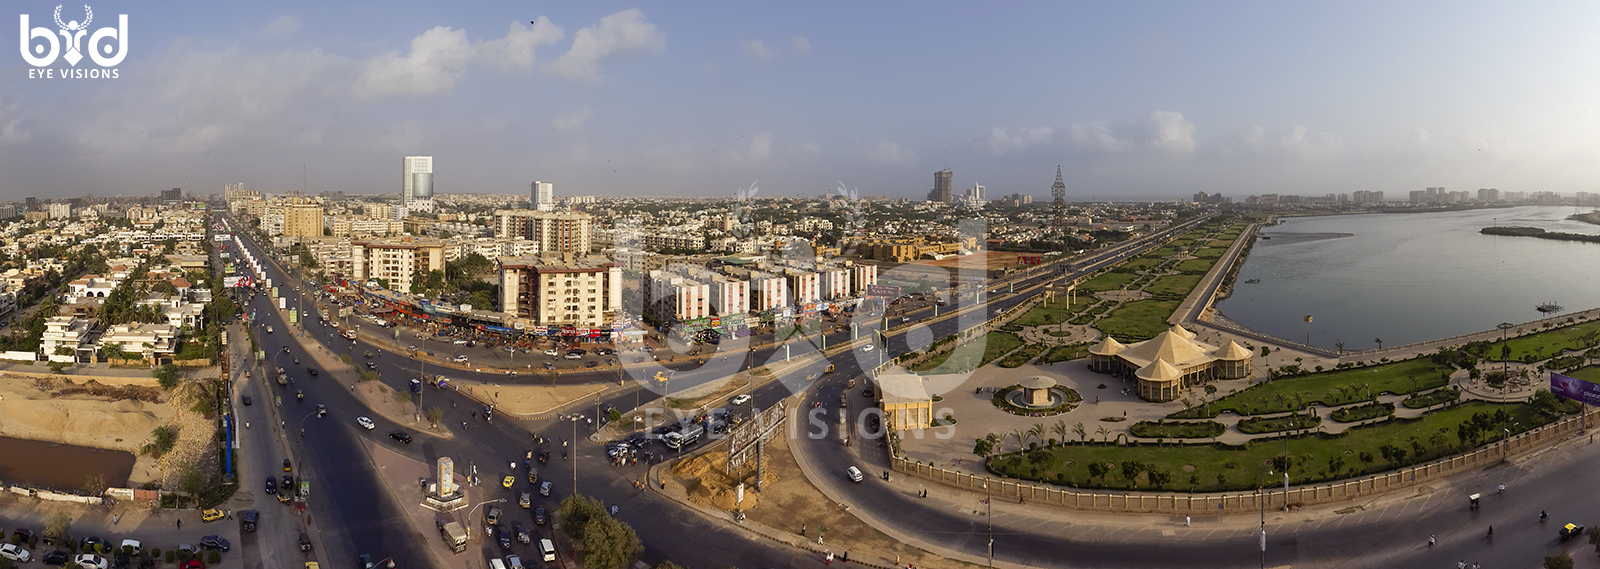 Karachi-From-Top-of-Continental-Biscuit-Office.jpg